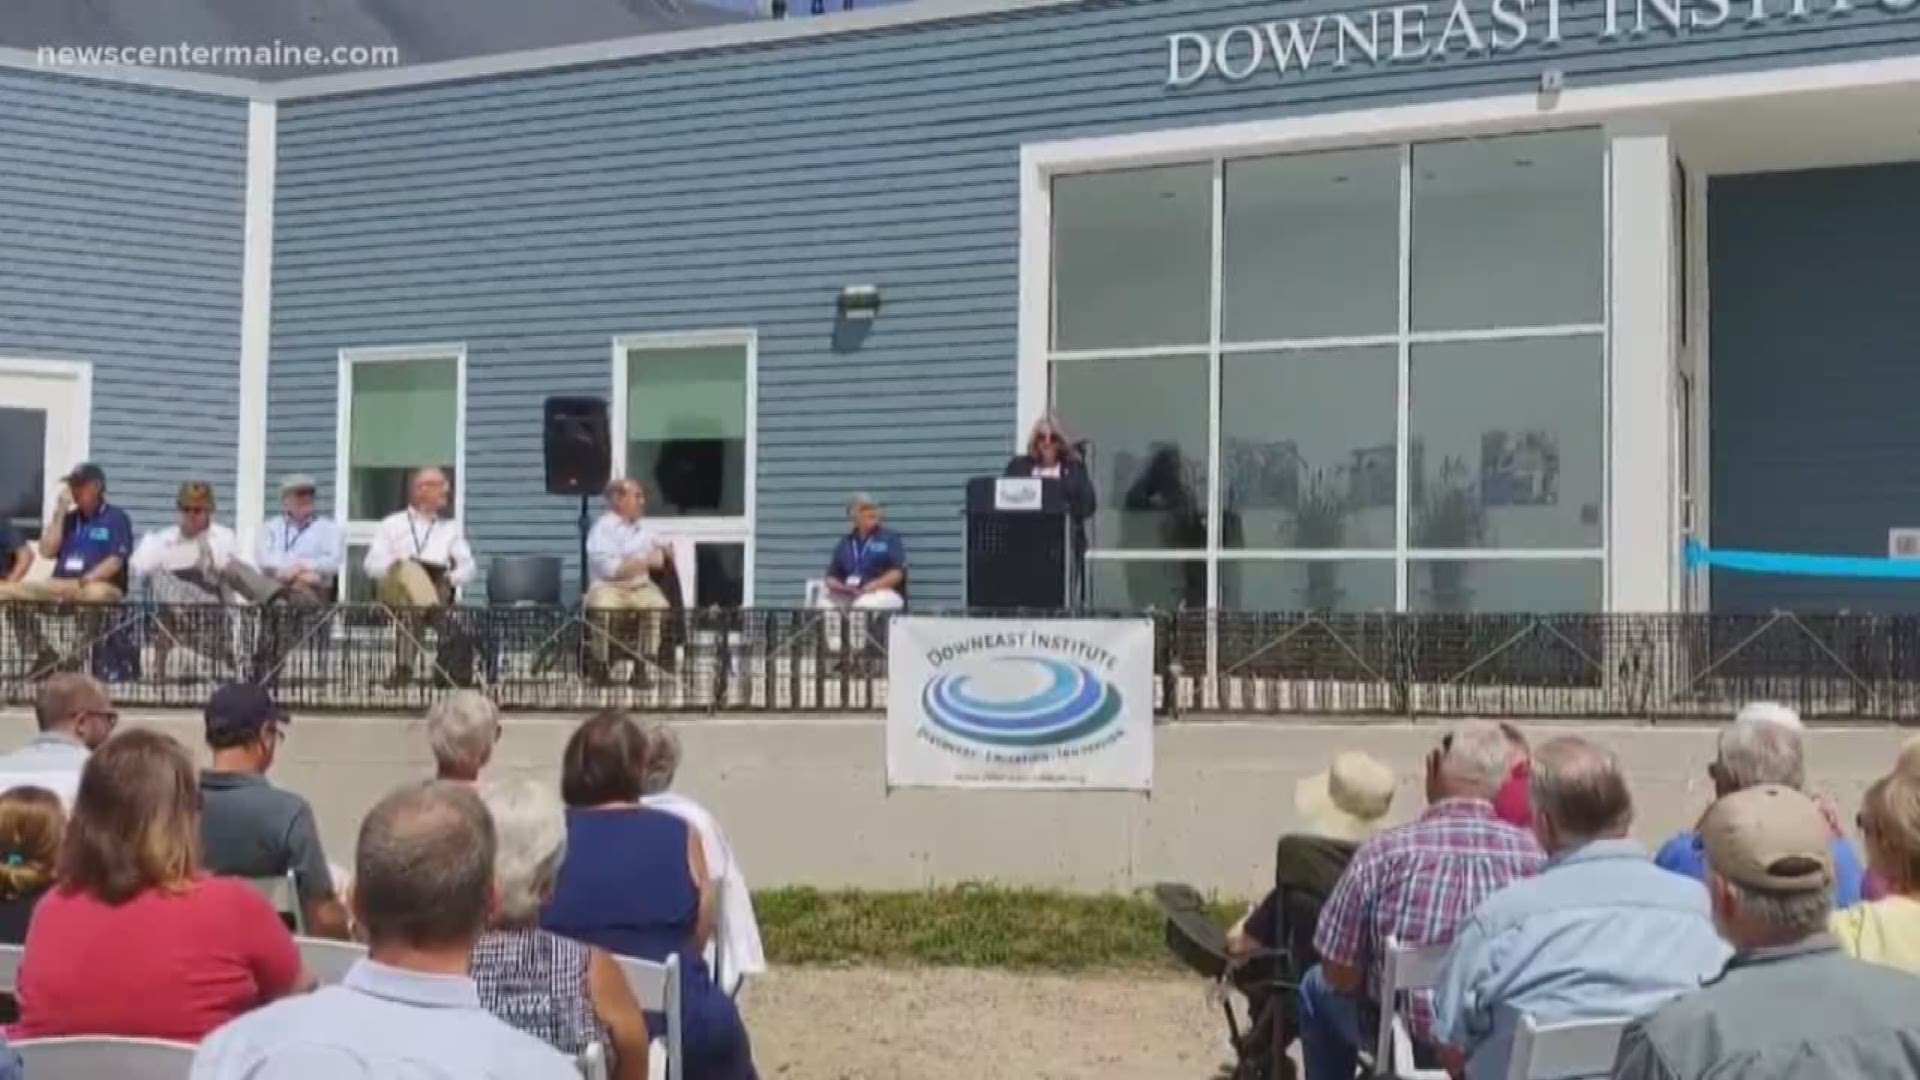 Downeast Institute celebrates facility expansion